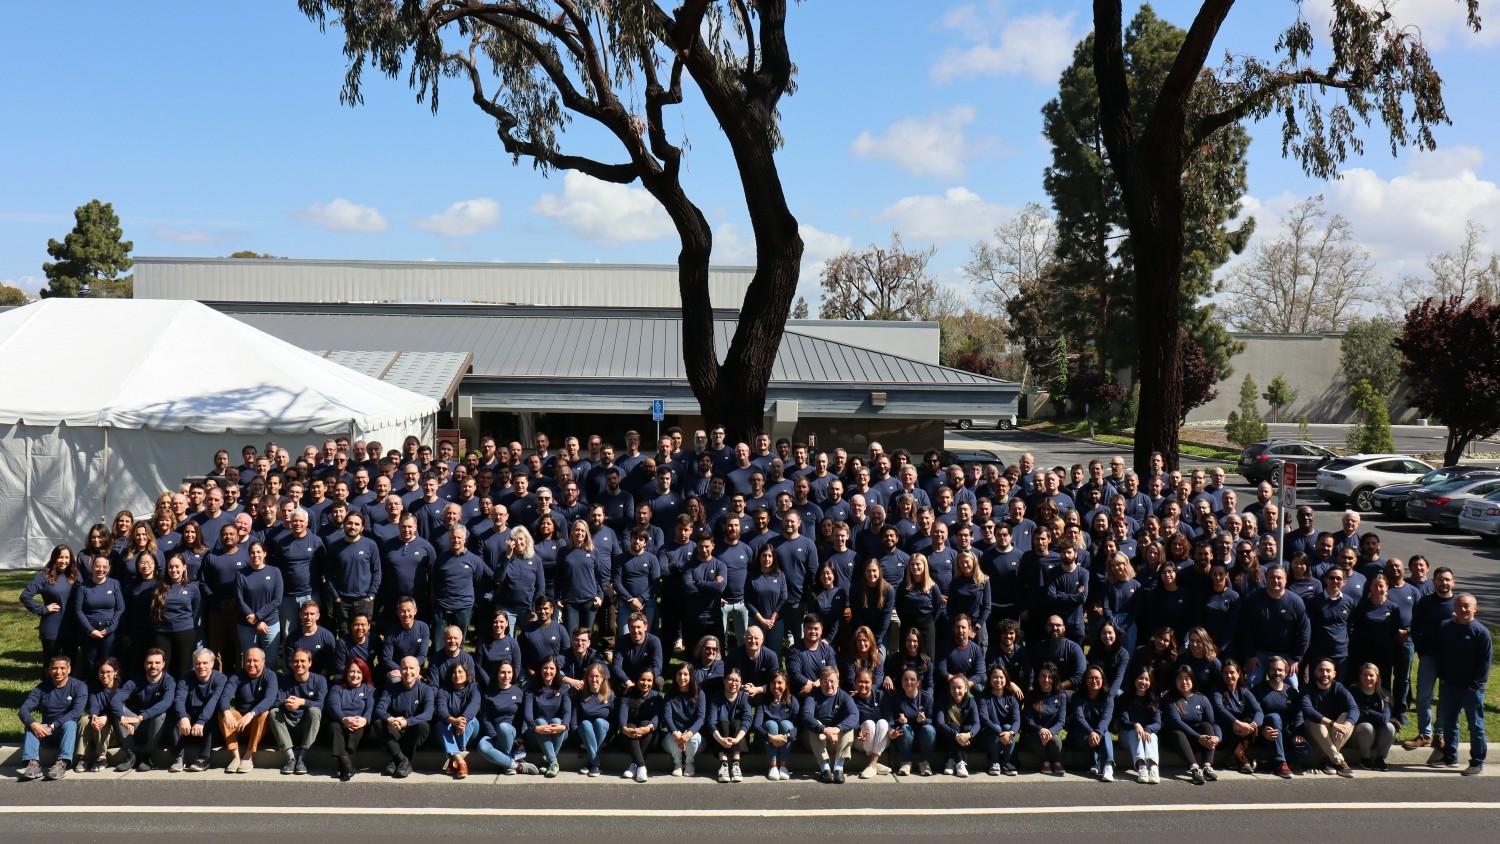 1RTI comes together for our annual Company Kick-Off at our Headquarters in Sunnyvale, CA. 